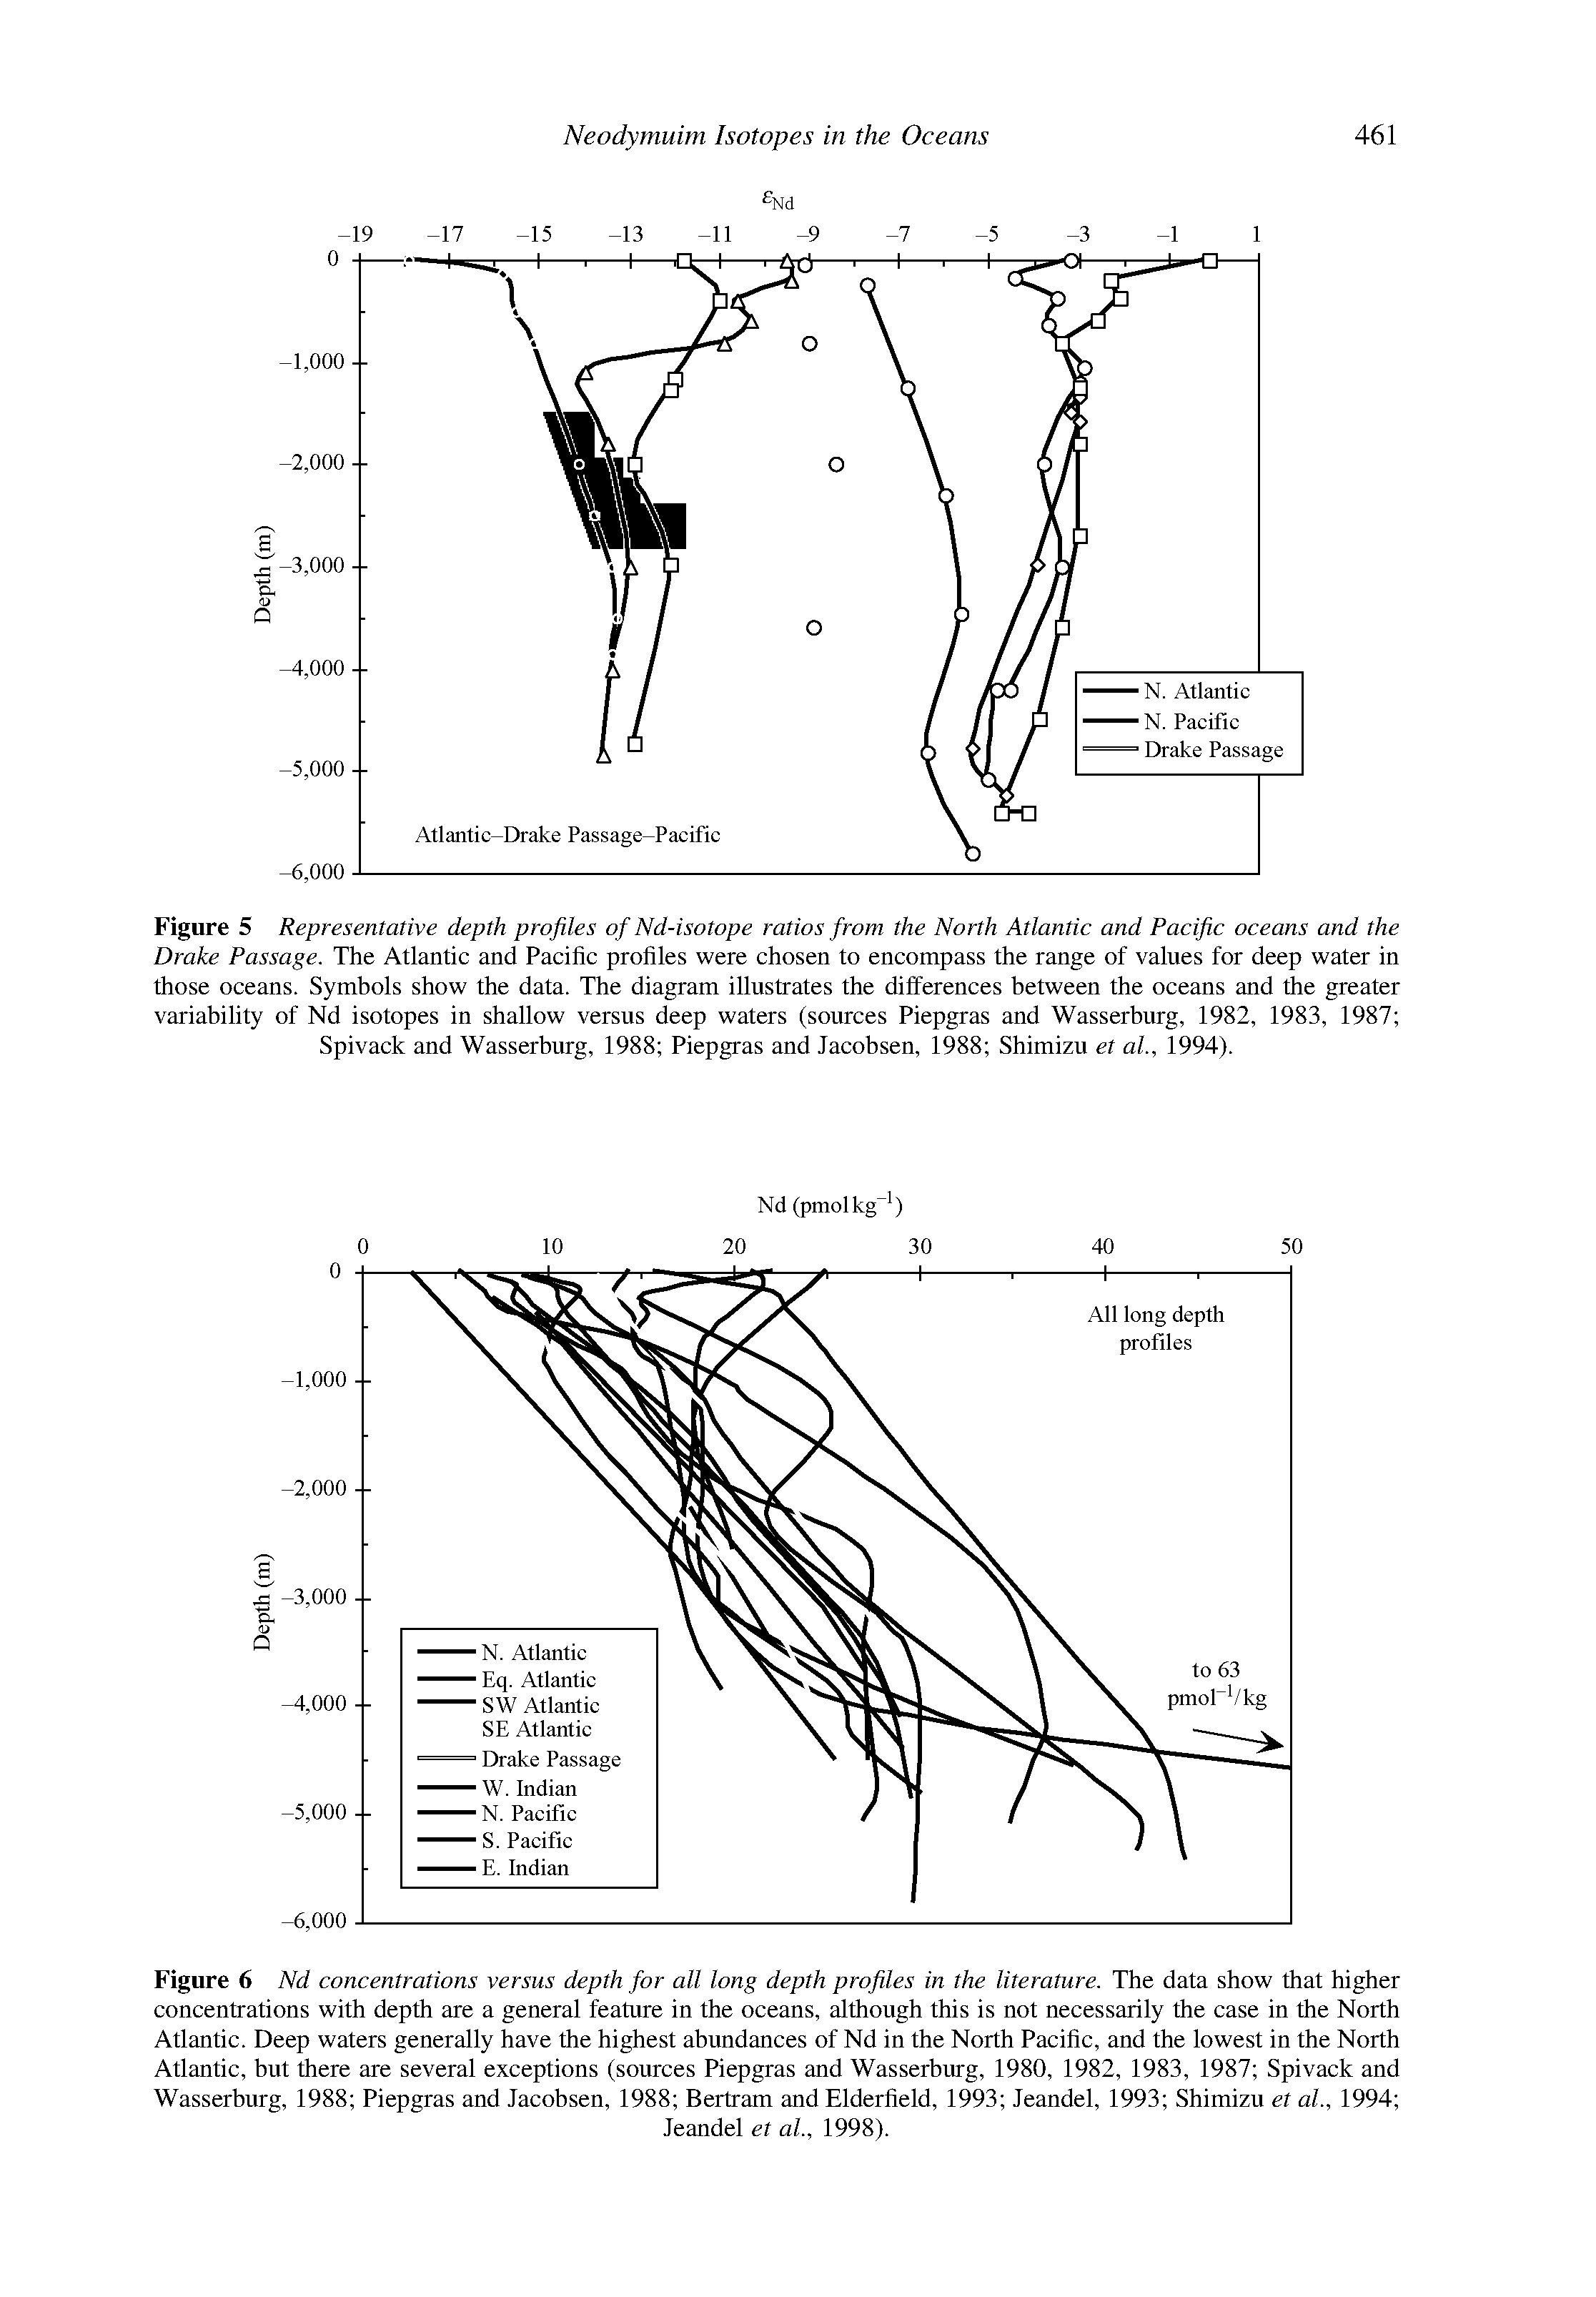 Figure 5 Representative depth profiles of Nd-isotope ratios from the North Atlantic and Pacific oceans and the Drake Passage. The Atlantic and Pacific profiles were chosen to encompass the range of values for deep water in those oceans. Symbols show the data. The diagram illustrates the differences between the oceans and the greater variability of Nd isotopes in shallow versus deep waters (sources Piepgras and Wasserburg, 1982, 1983, 1987 Spivack and Wasserburg, 1988 Piepgras and Jacobsen, 1988 Shimizu et al., 1994).